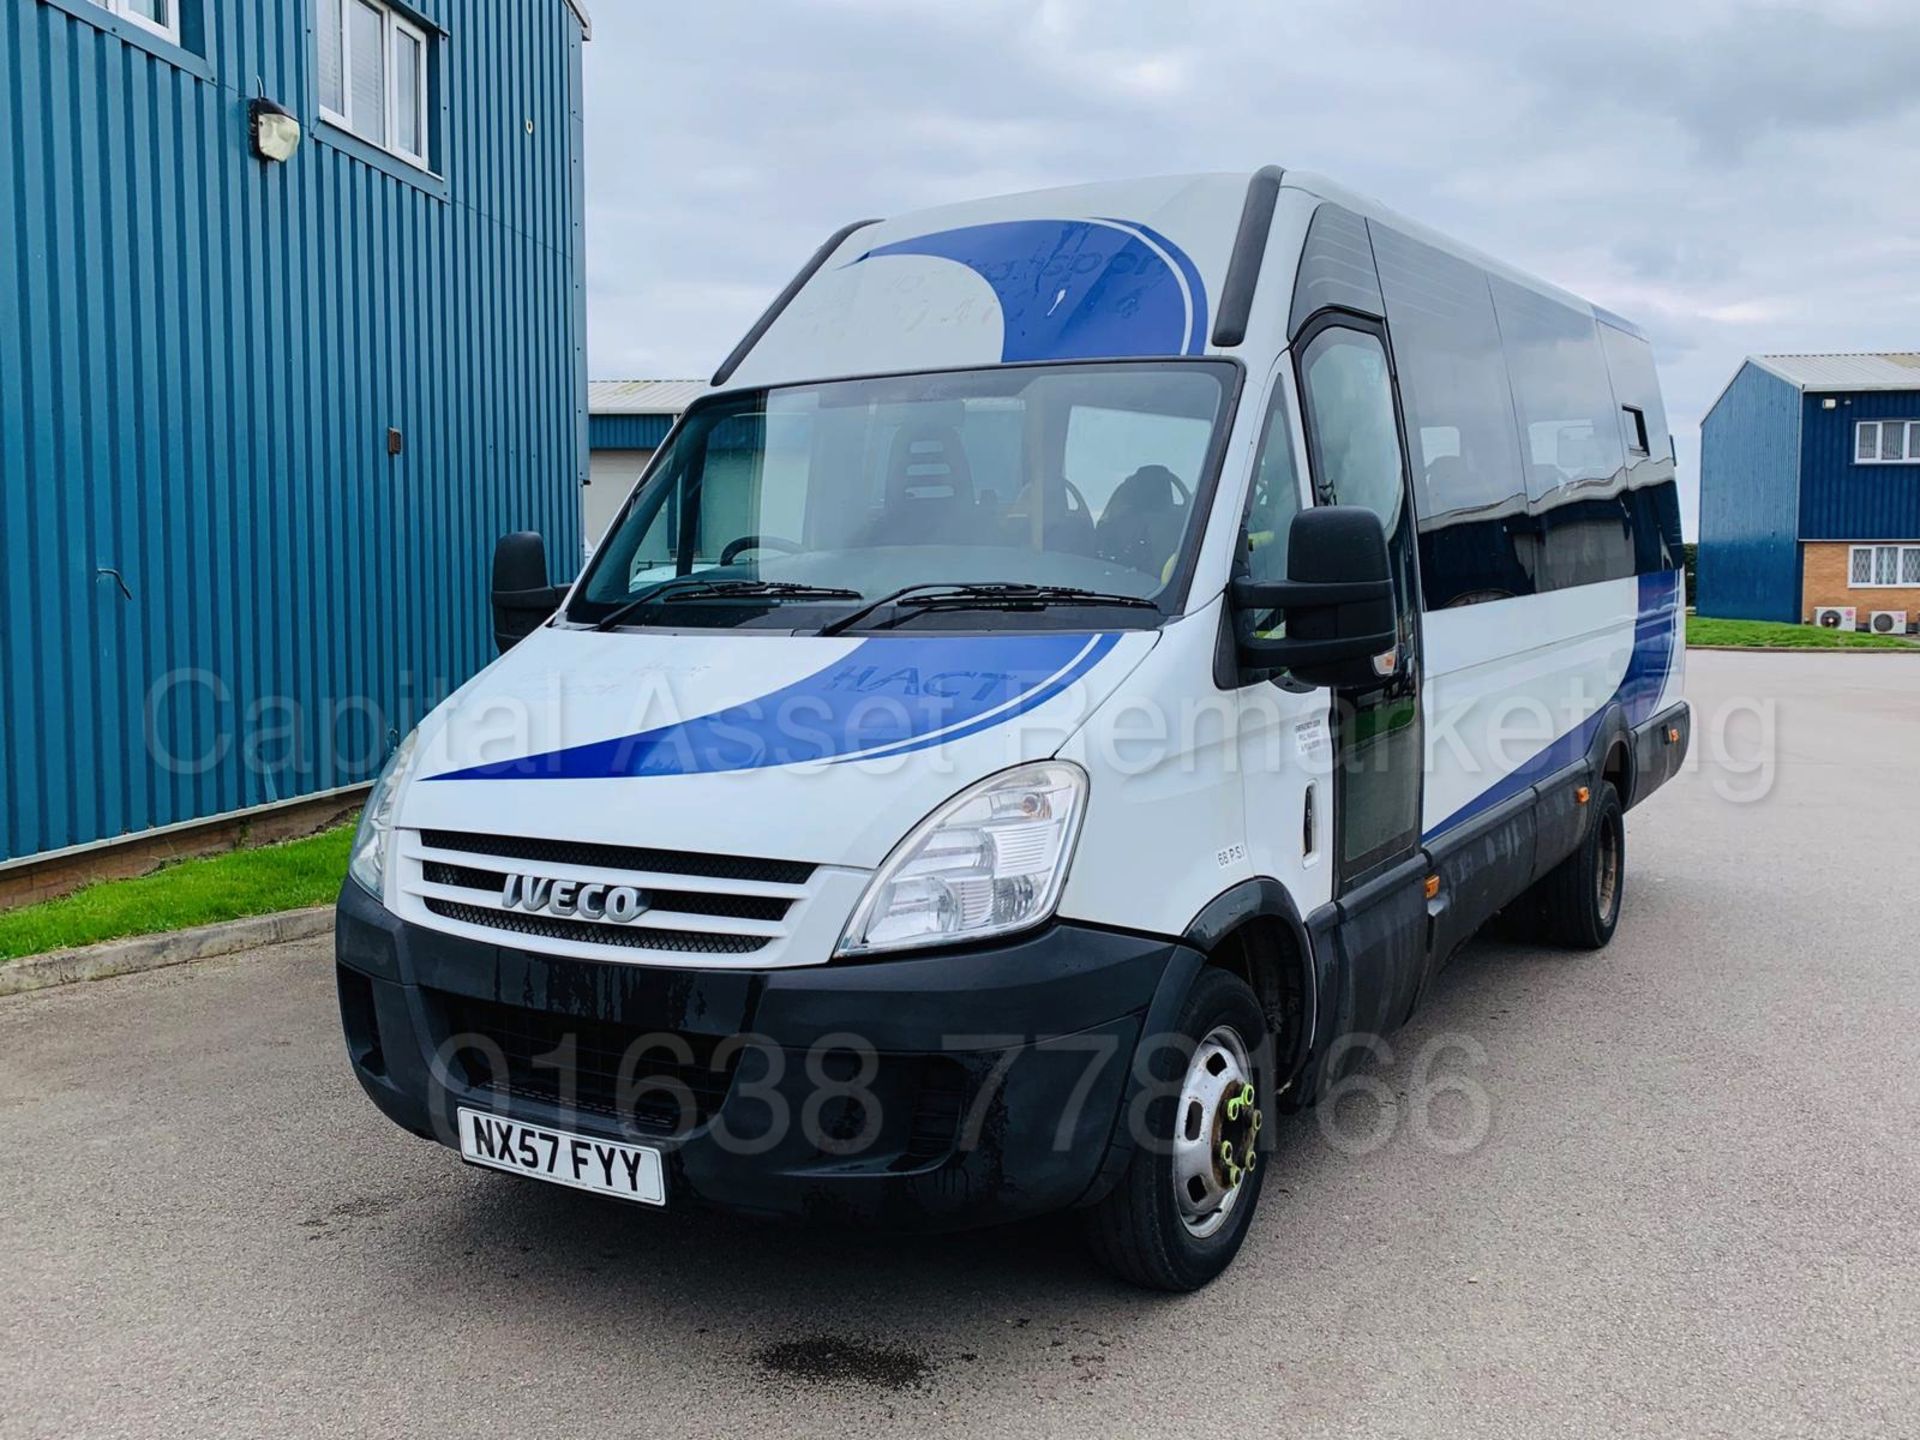 (On Sale) IVECO DAILY *LWB - 16 SEATER MINI-BUS / COACH* (57 REG) '3.0 DIESEL' *WHEEL CHAIR RAMP* - Image 2 of 29